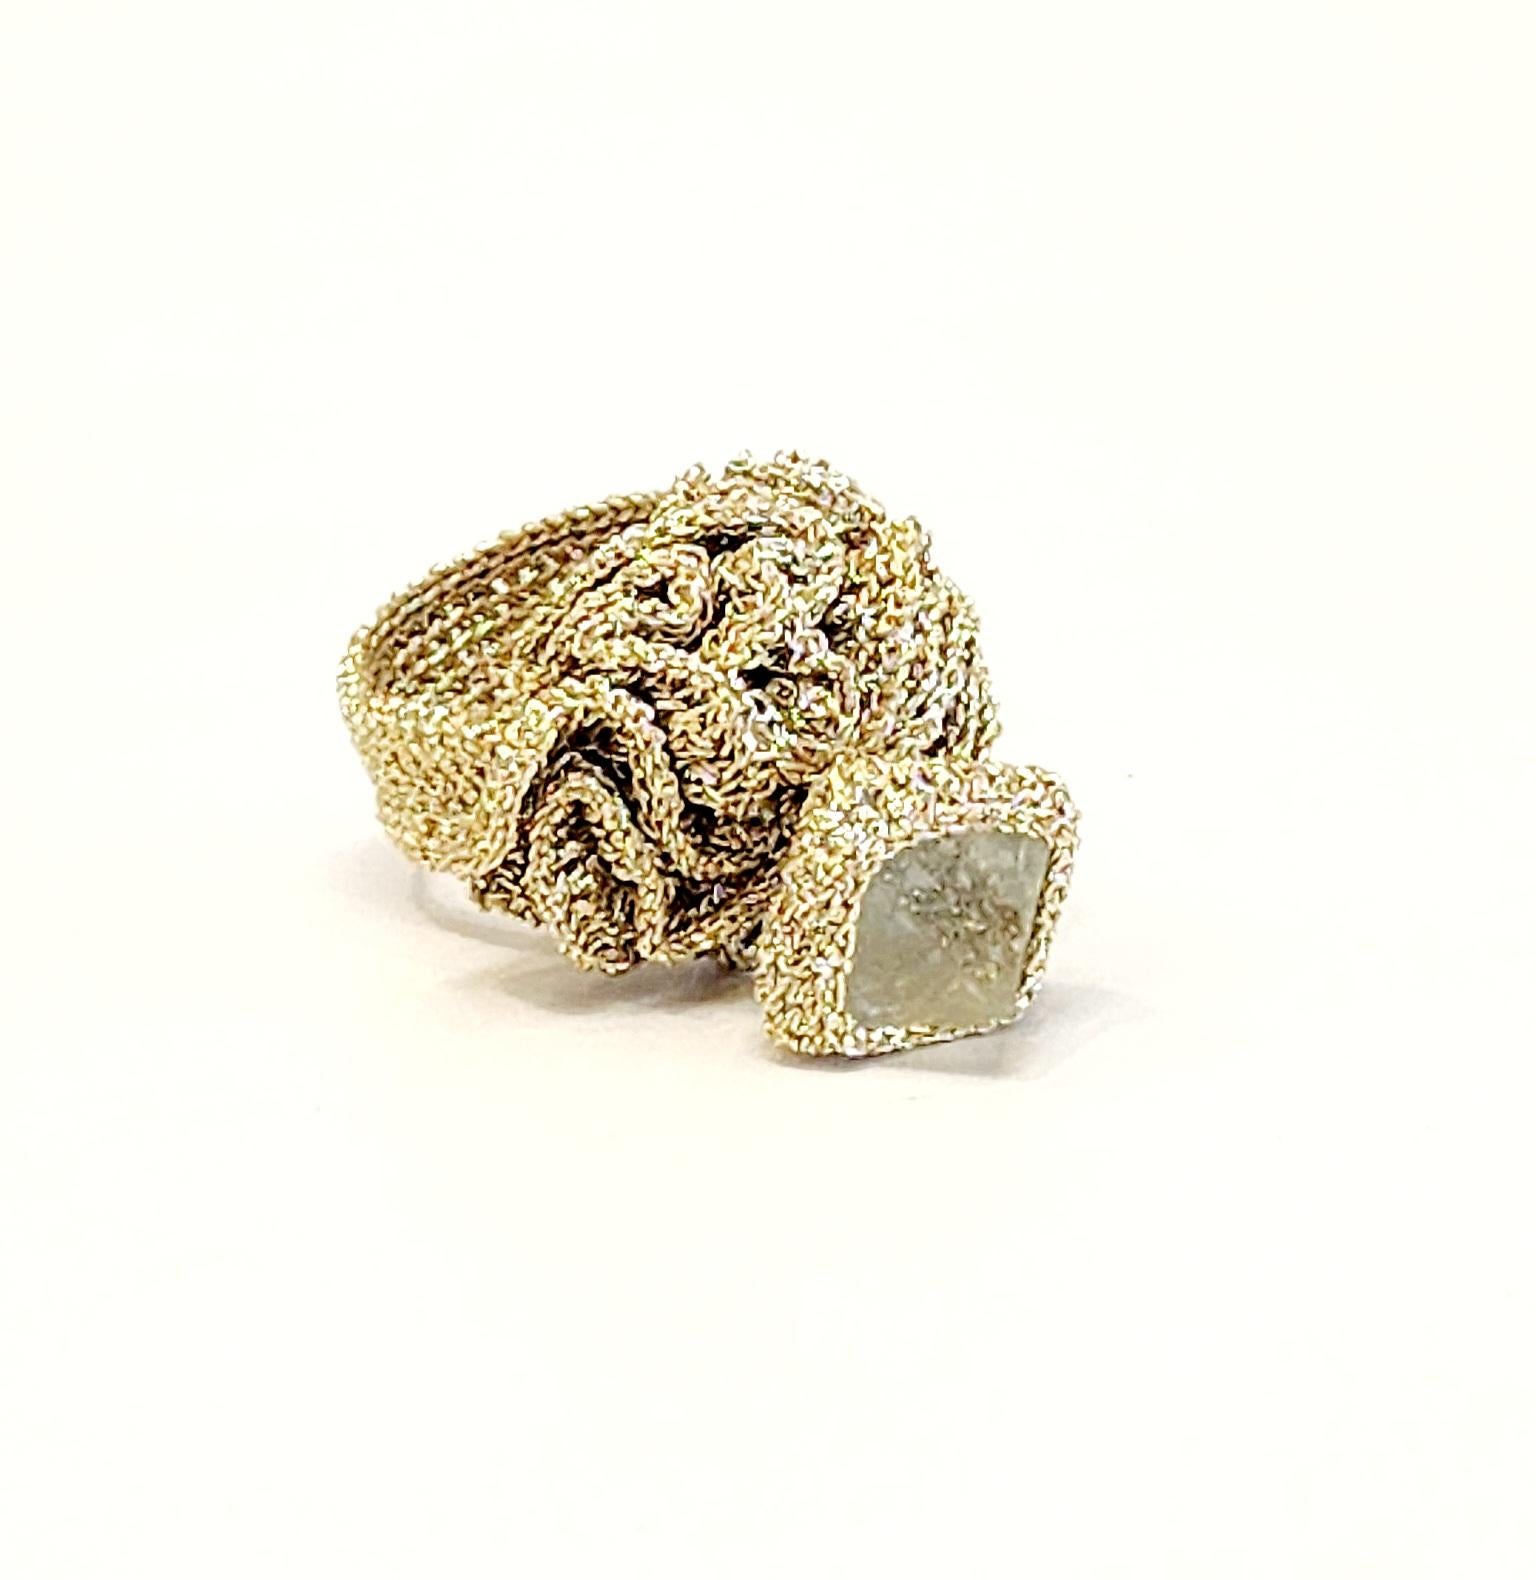 One of a kind handcrafted Crochet ring. This is a unique statement Cocktail ring. A beautiful Pyramid shaped aqua Fluorite Stone Crochet on top of a wavelike round design. The ring is very light as it is Crochet with Golden smooth passing Thread